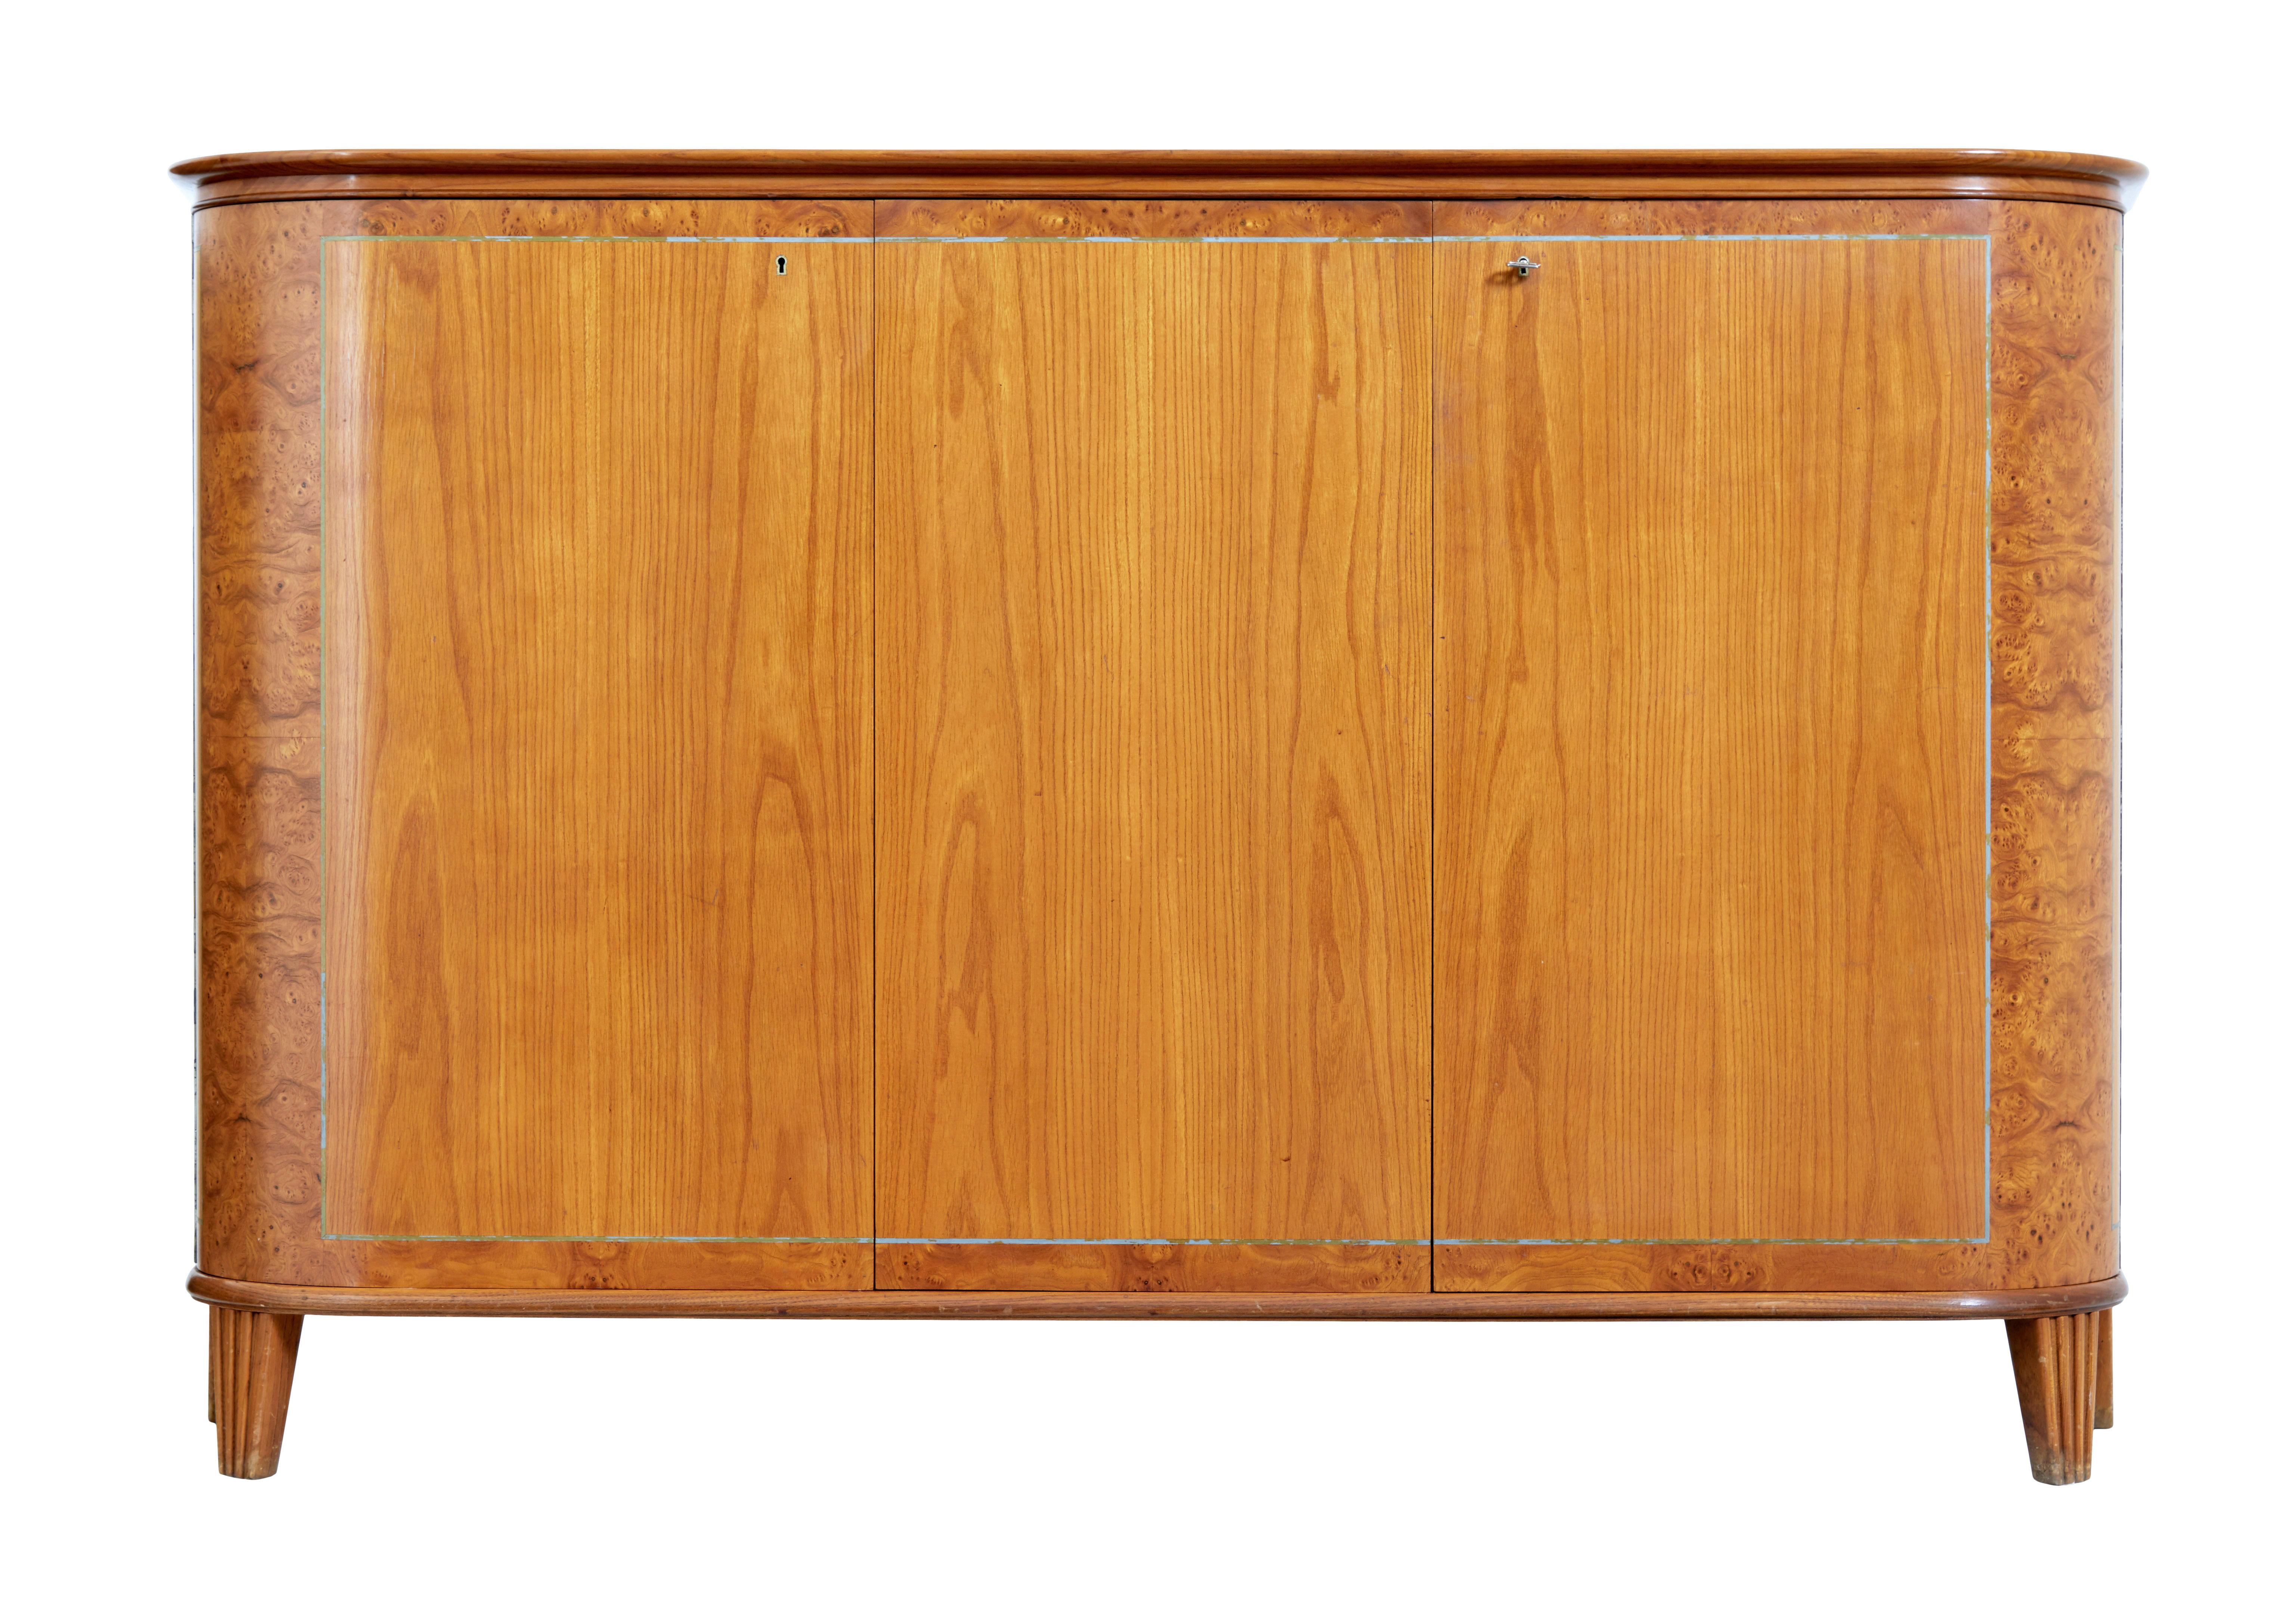 Midcentury elm sideboard by Thysells Mobler circa 1950.

Popular model by well know maker Thysells Mobler , this sideboard being different from the norm being made in elm with masurian birch cross banding.

Rounded shaped top surface with